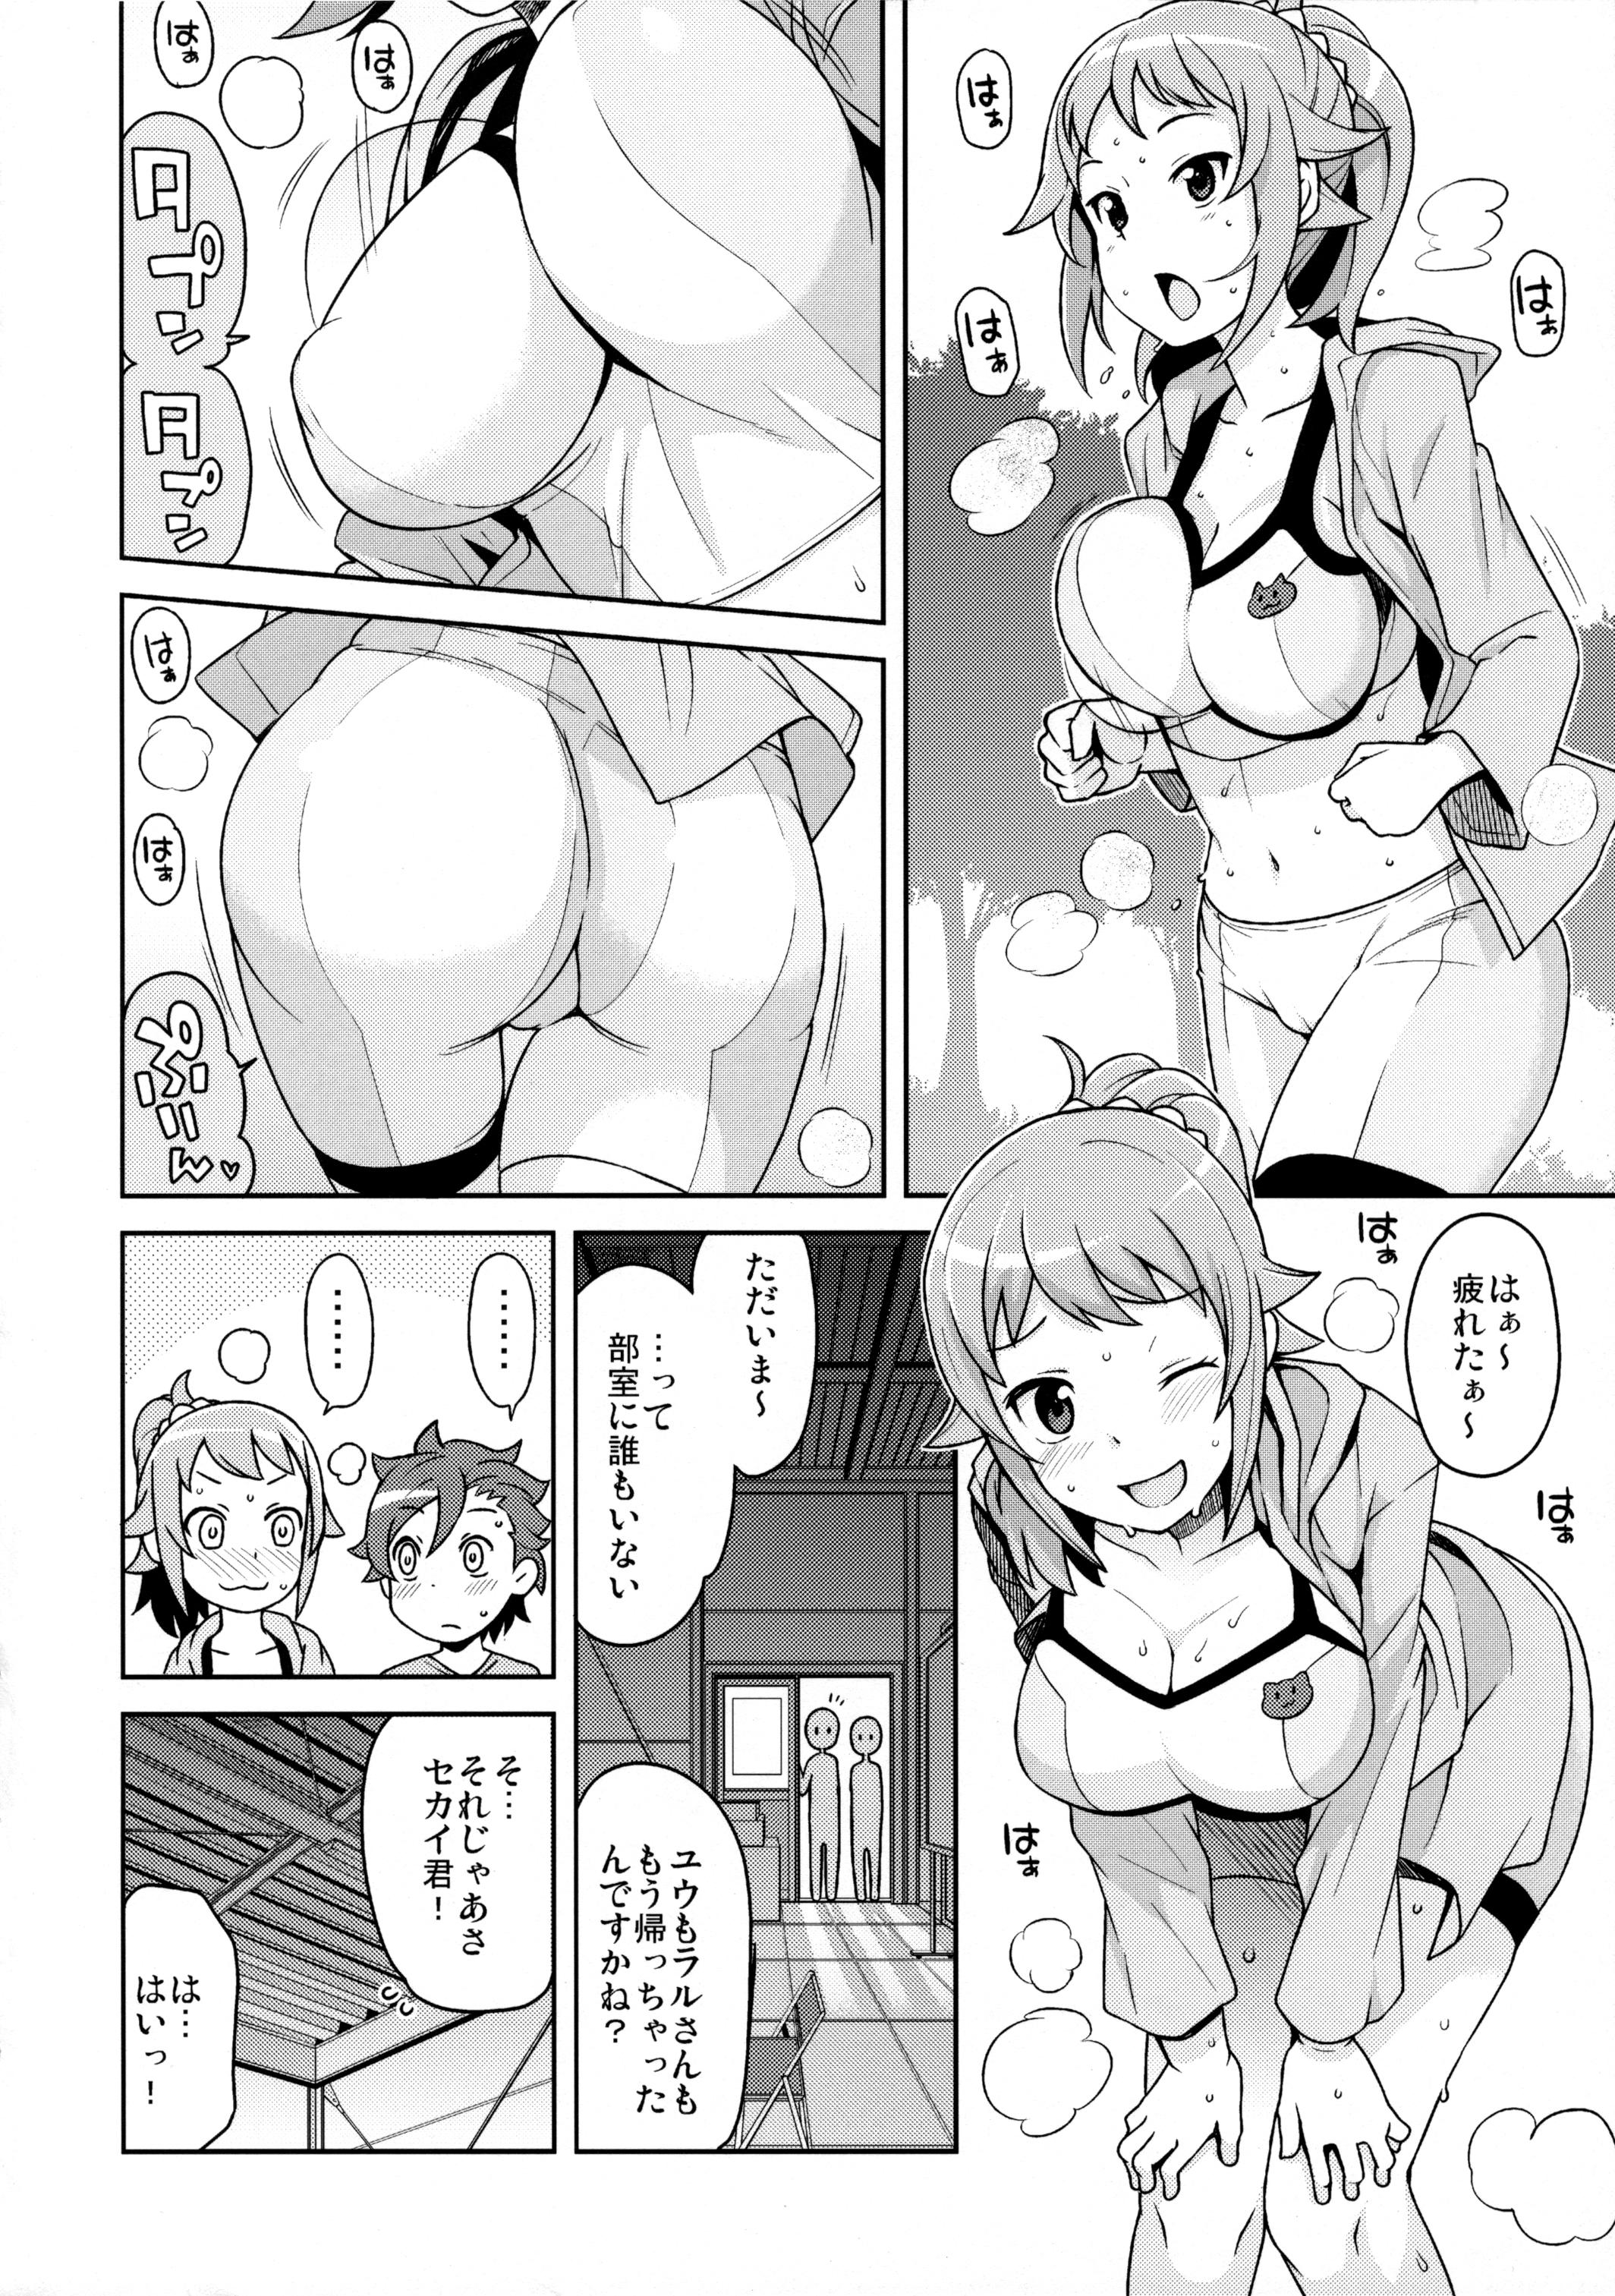 Bigass Chibikko Bitch Try - Gundam build fighters try 18 Year Old Porn - Page 5